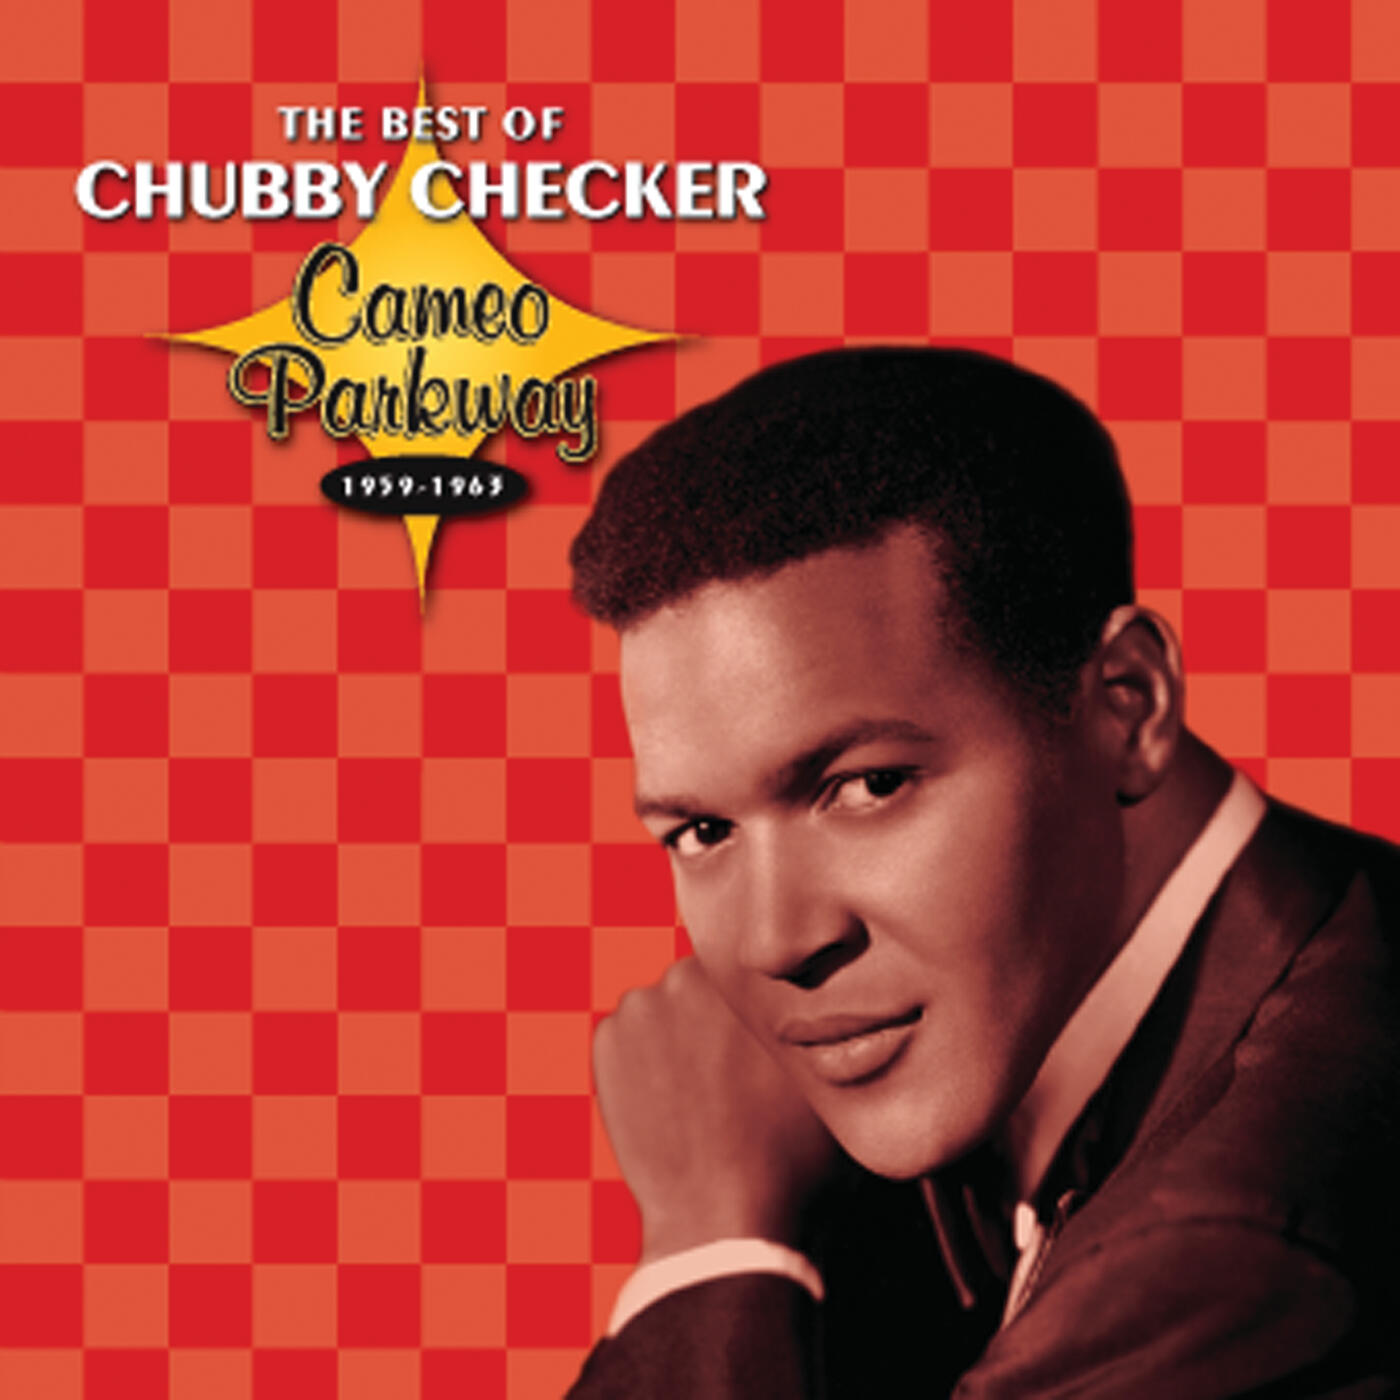 Chubby Checker The Best Of Chubby Checker 1959 1963 Iheartradio 